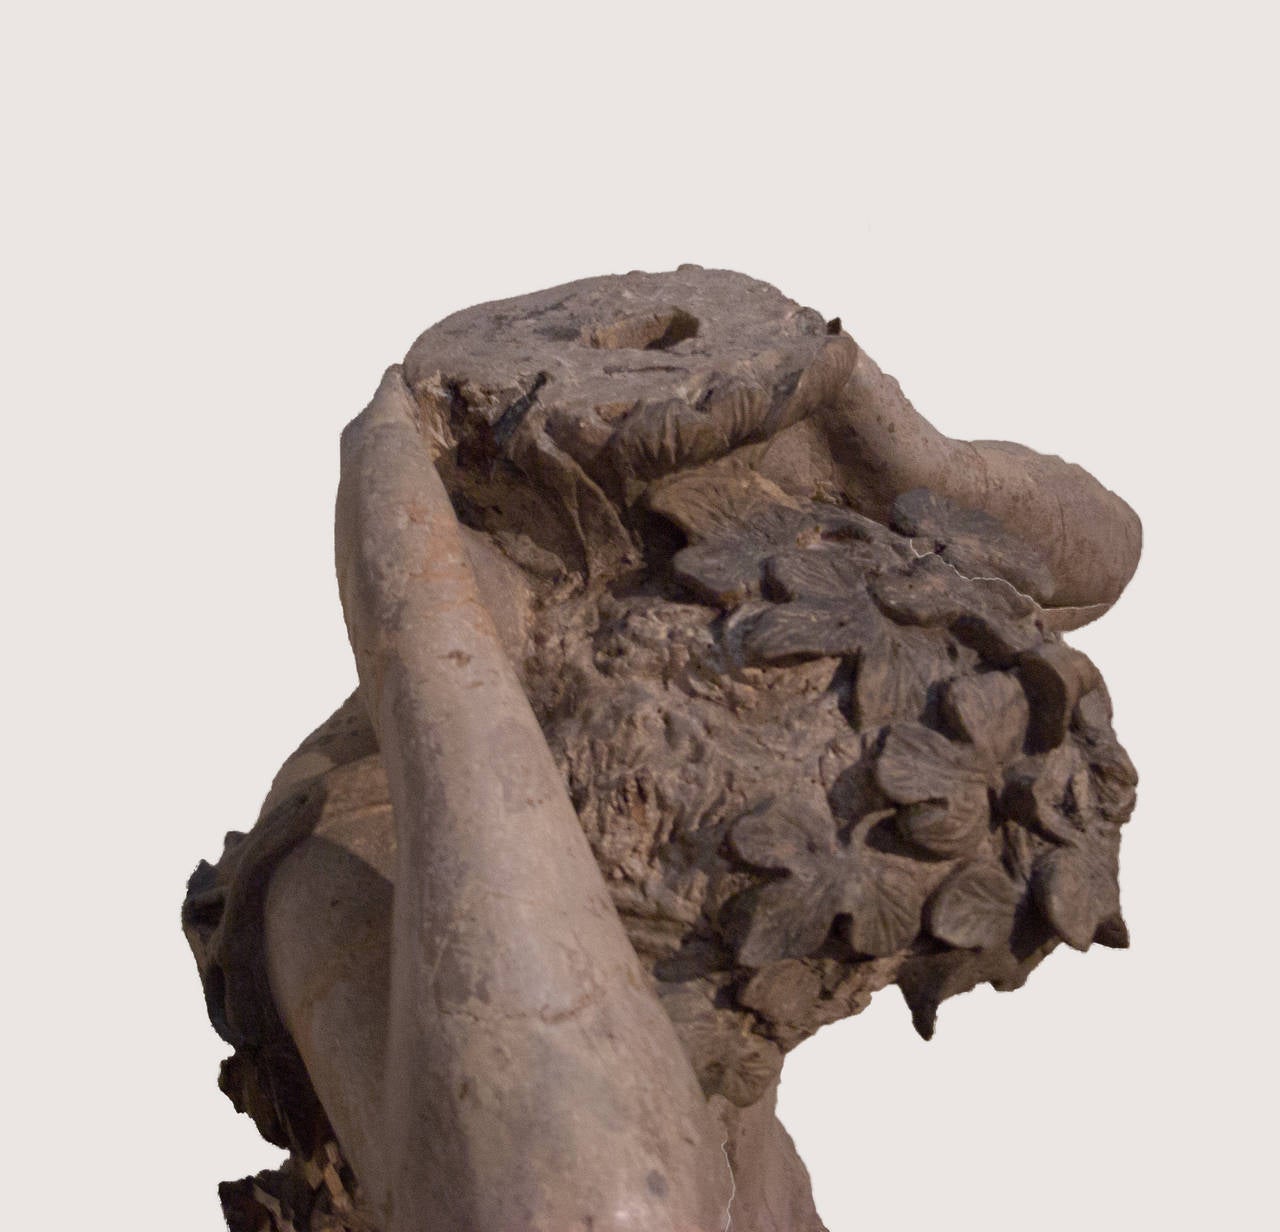 Satyr attributed to Anton Maria Maragliano (1664-1739).

This wonderful secular wooden Satyr dating circa 1695 is attributed to Anton Maria Maragliano (Genoa, 1664-1739.). 
Considered an important Baroque sculptor, Maragliano is perhaps best